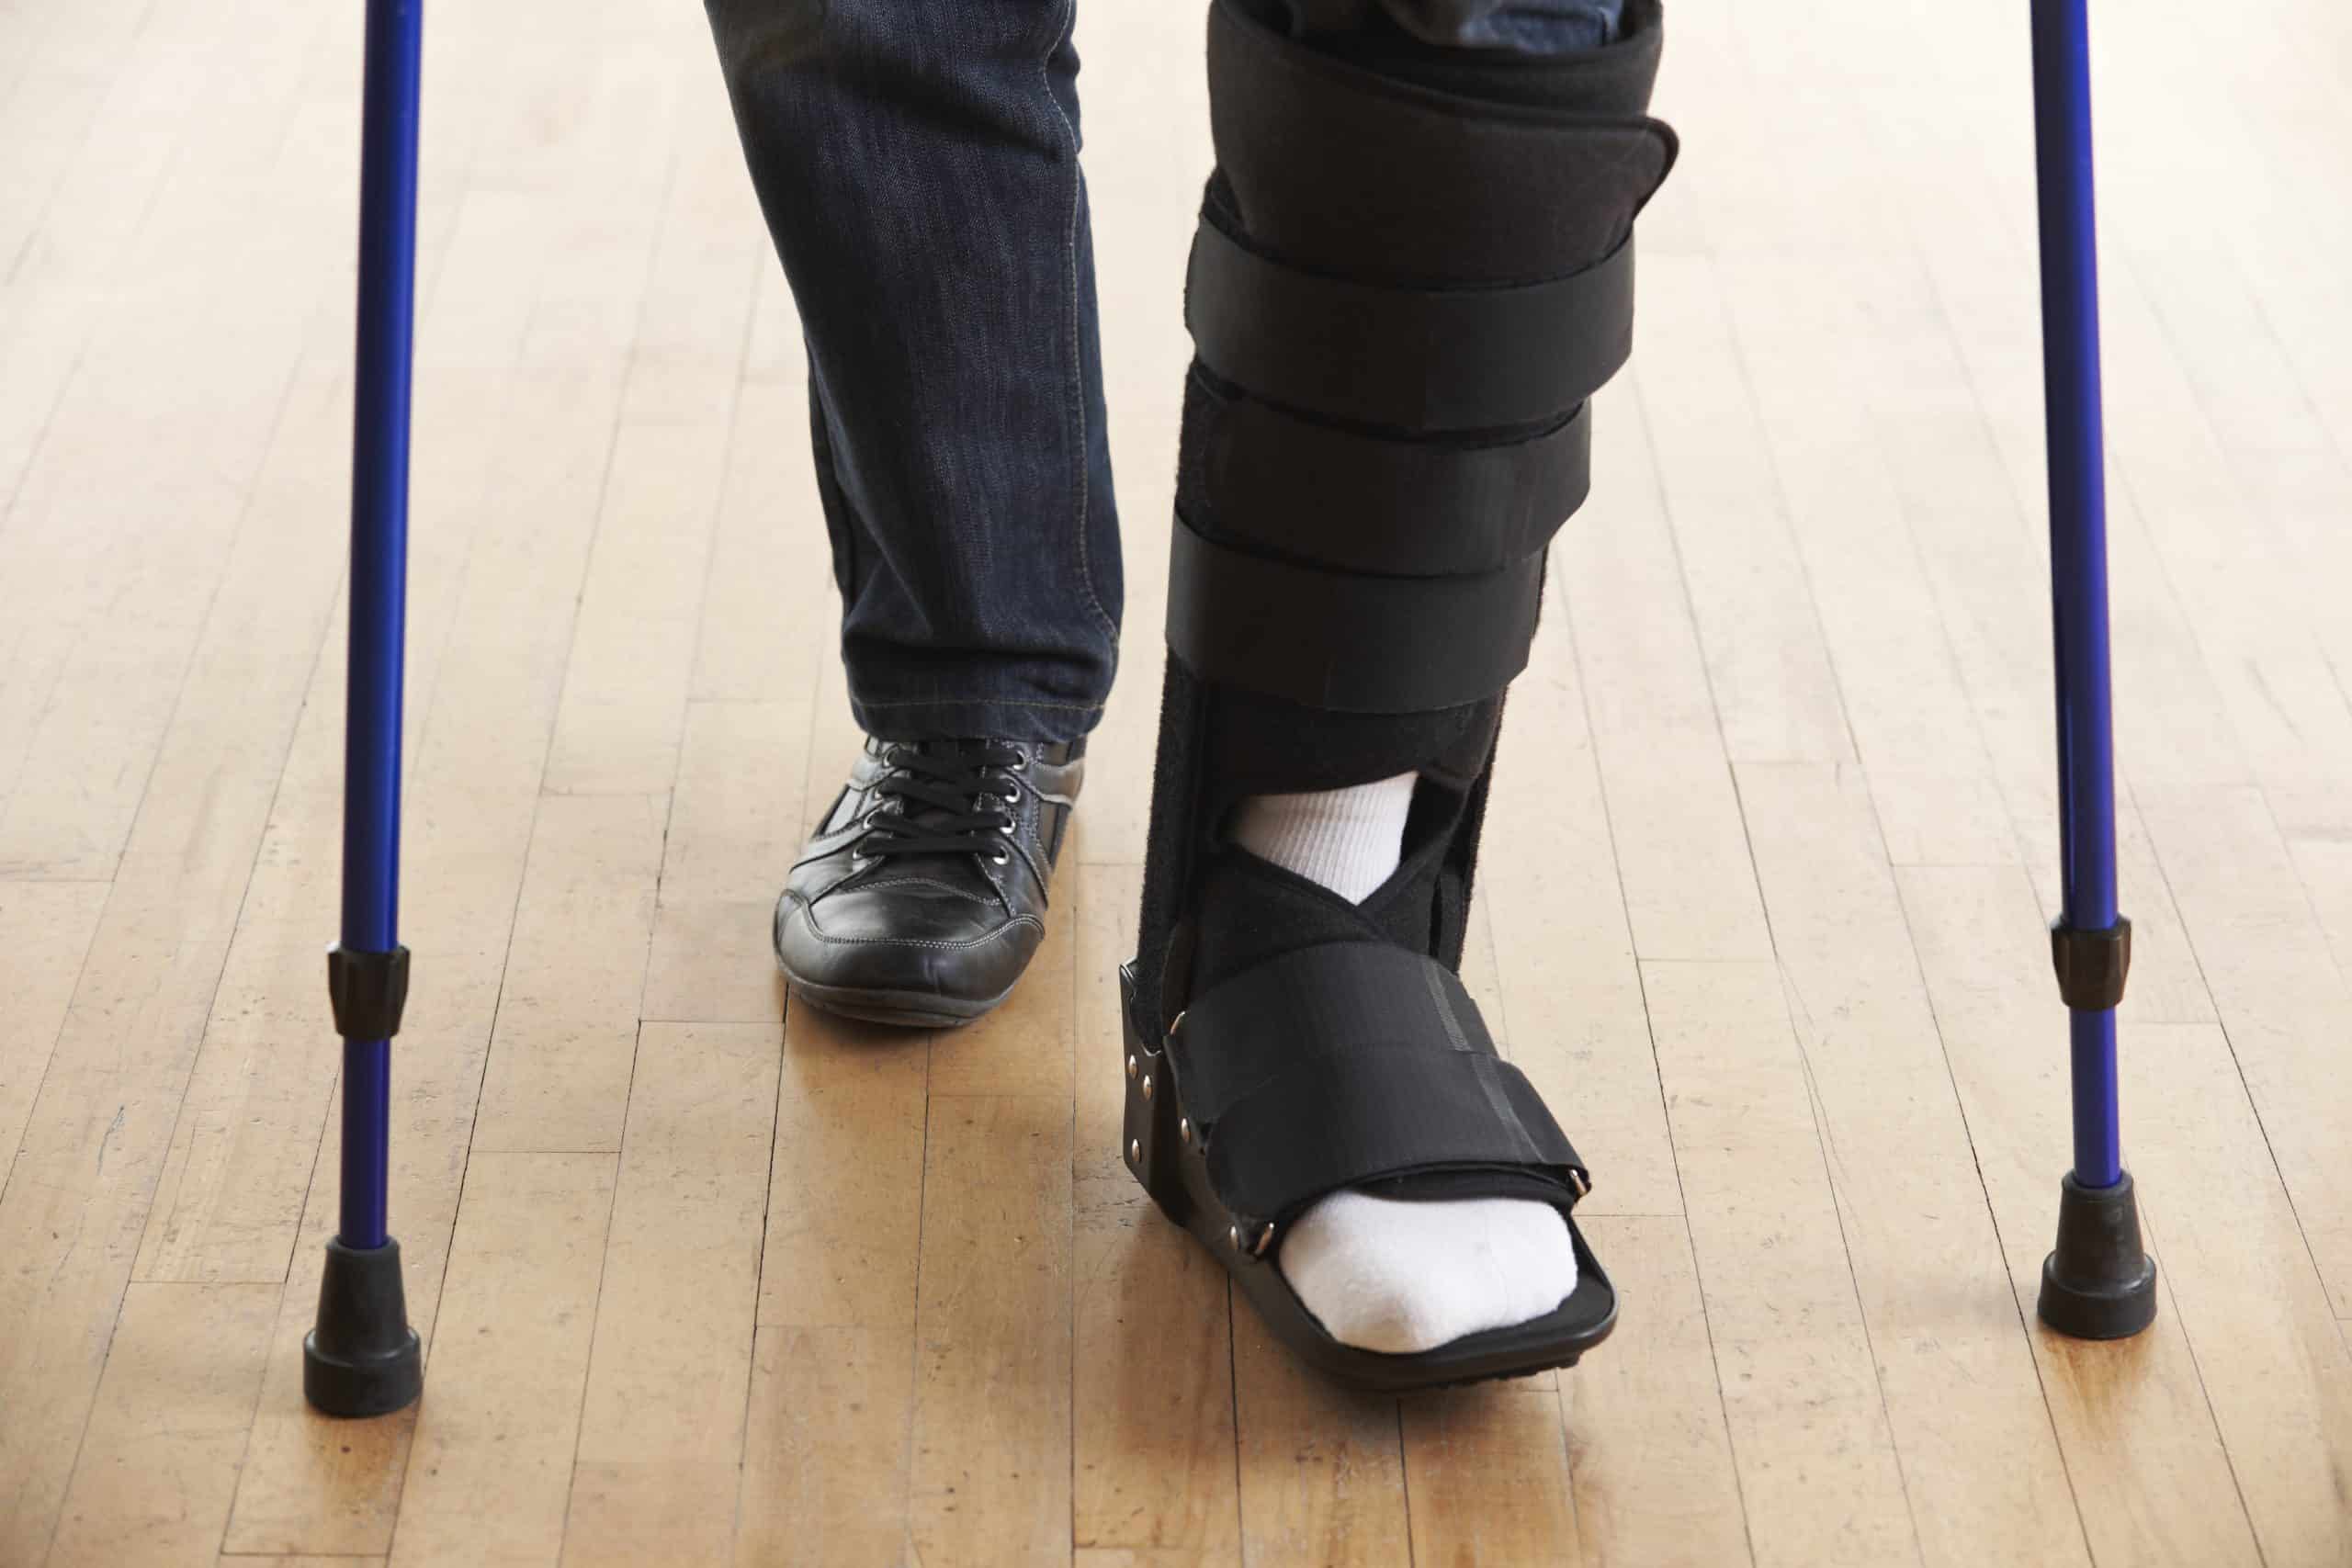 Photo of a foot in a medical boot after an injury with the bottom of a pair of crutches visible